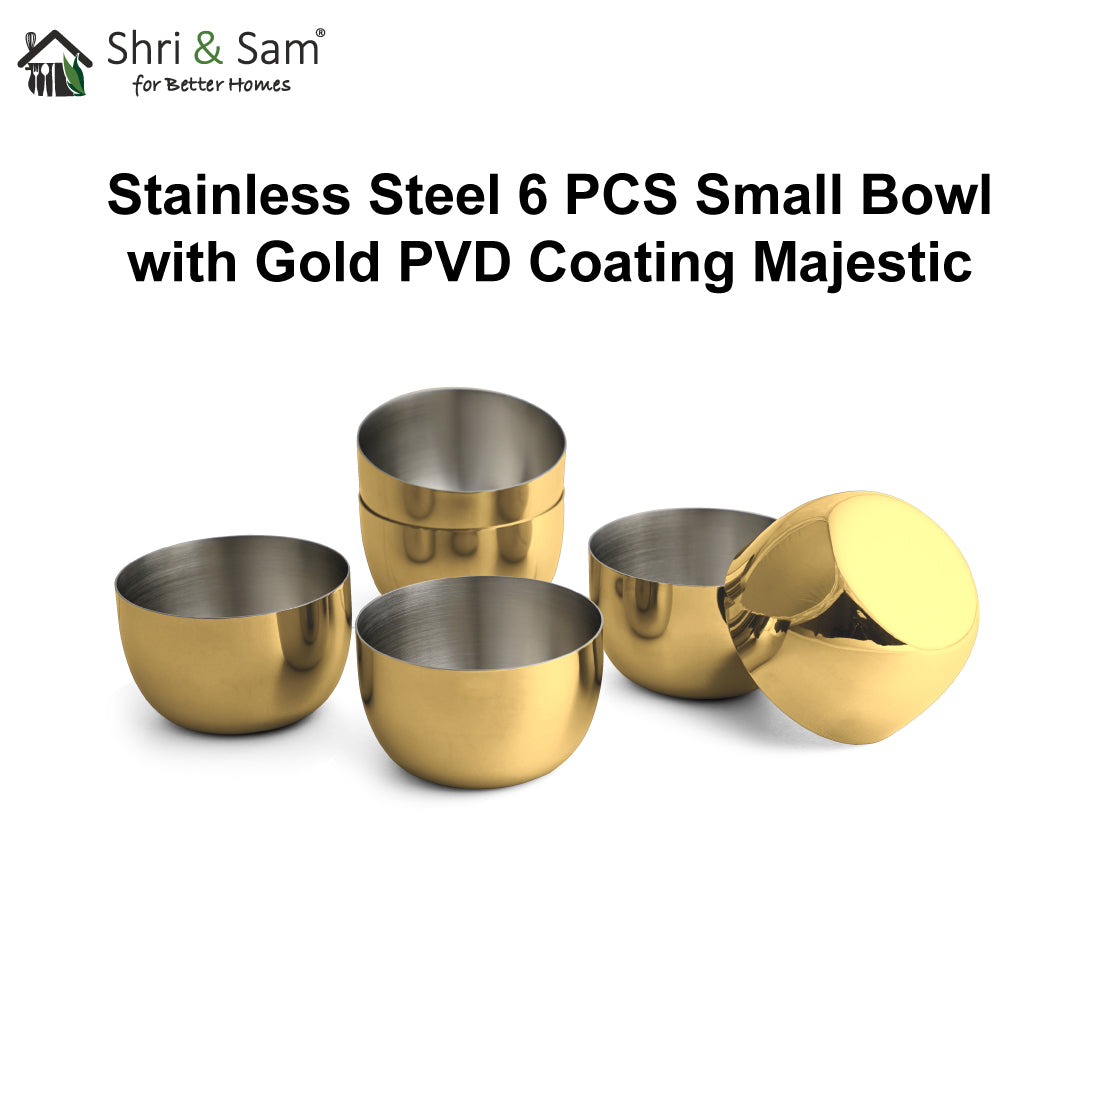 Buy Shri & Sam Stainless Steel, Lunia (Gold) Online at Low Prices in India  